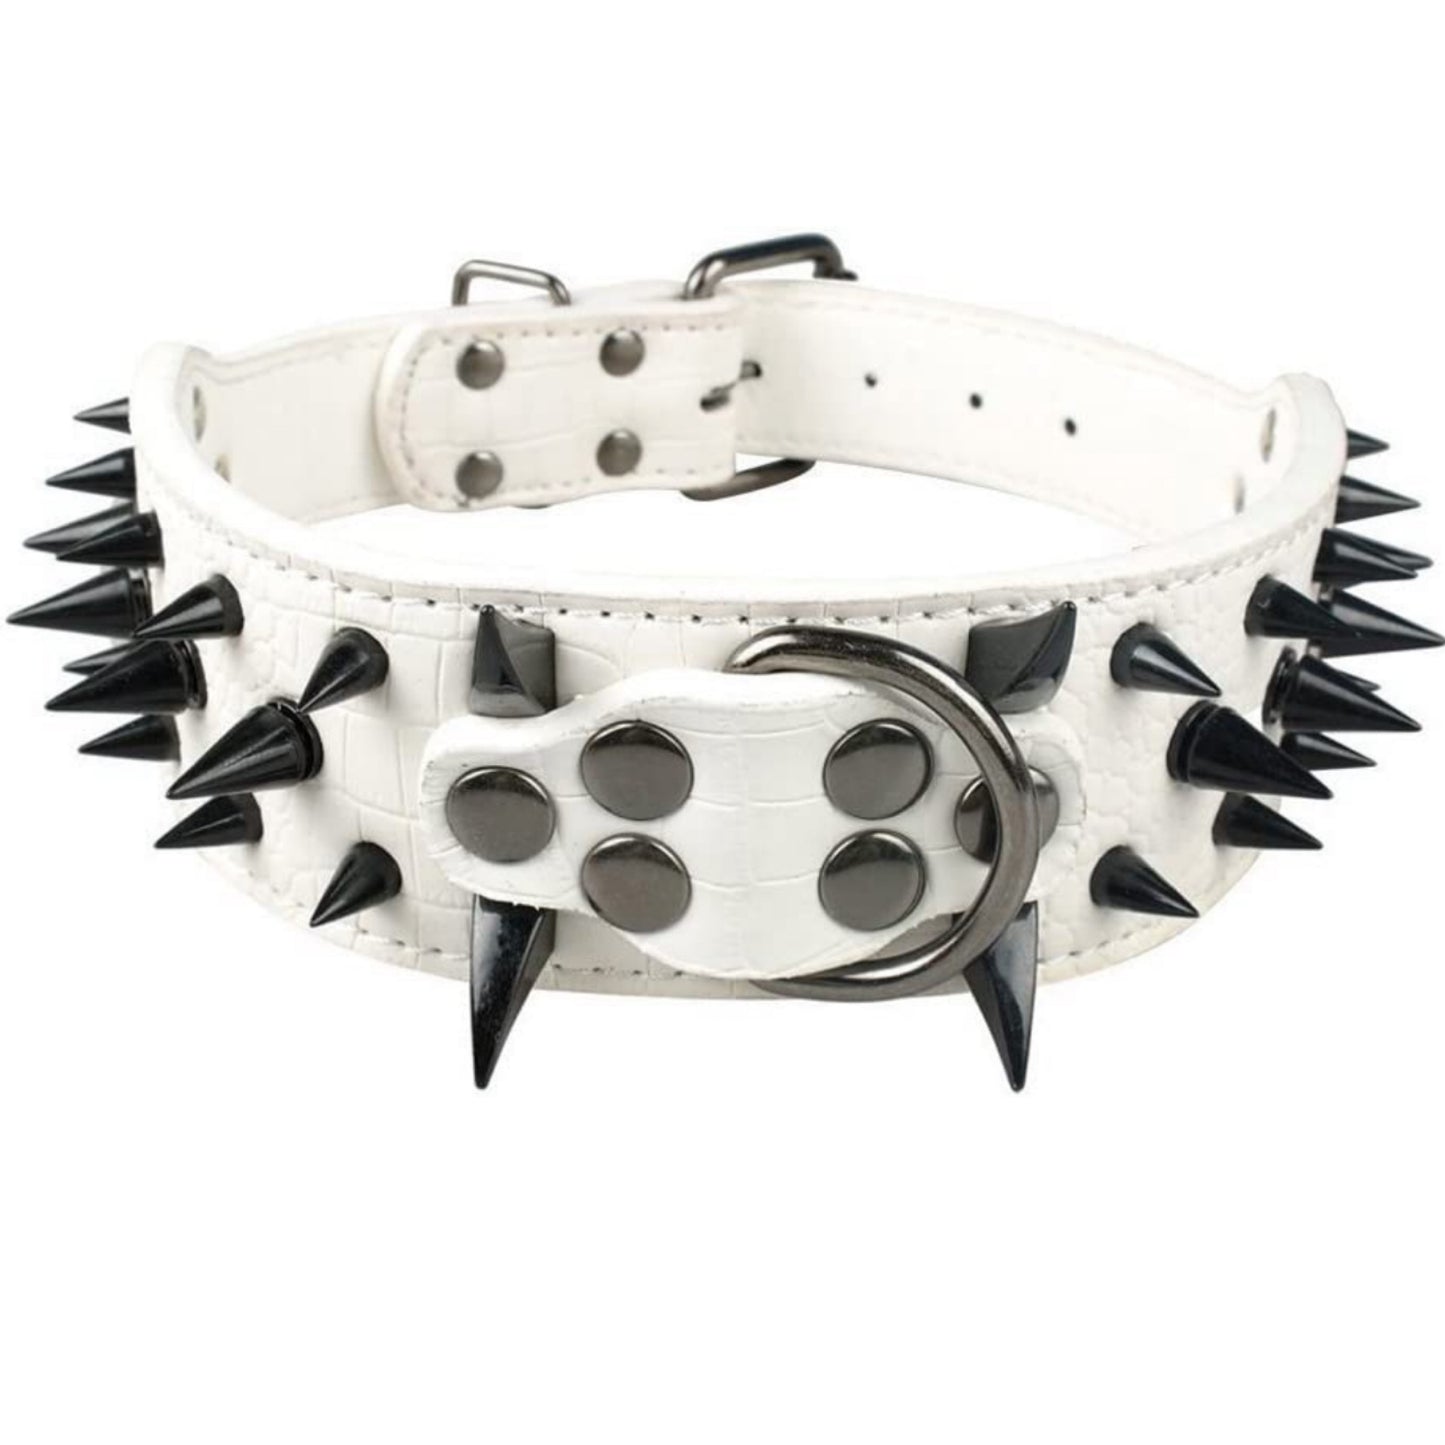 Spiked Studded Leather Collars